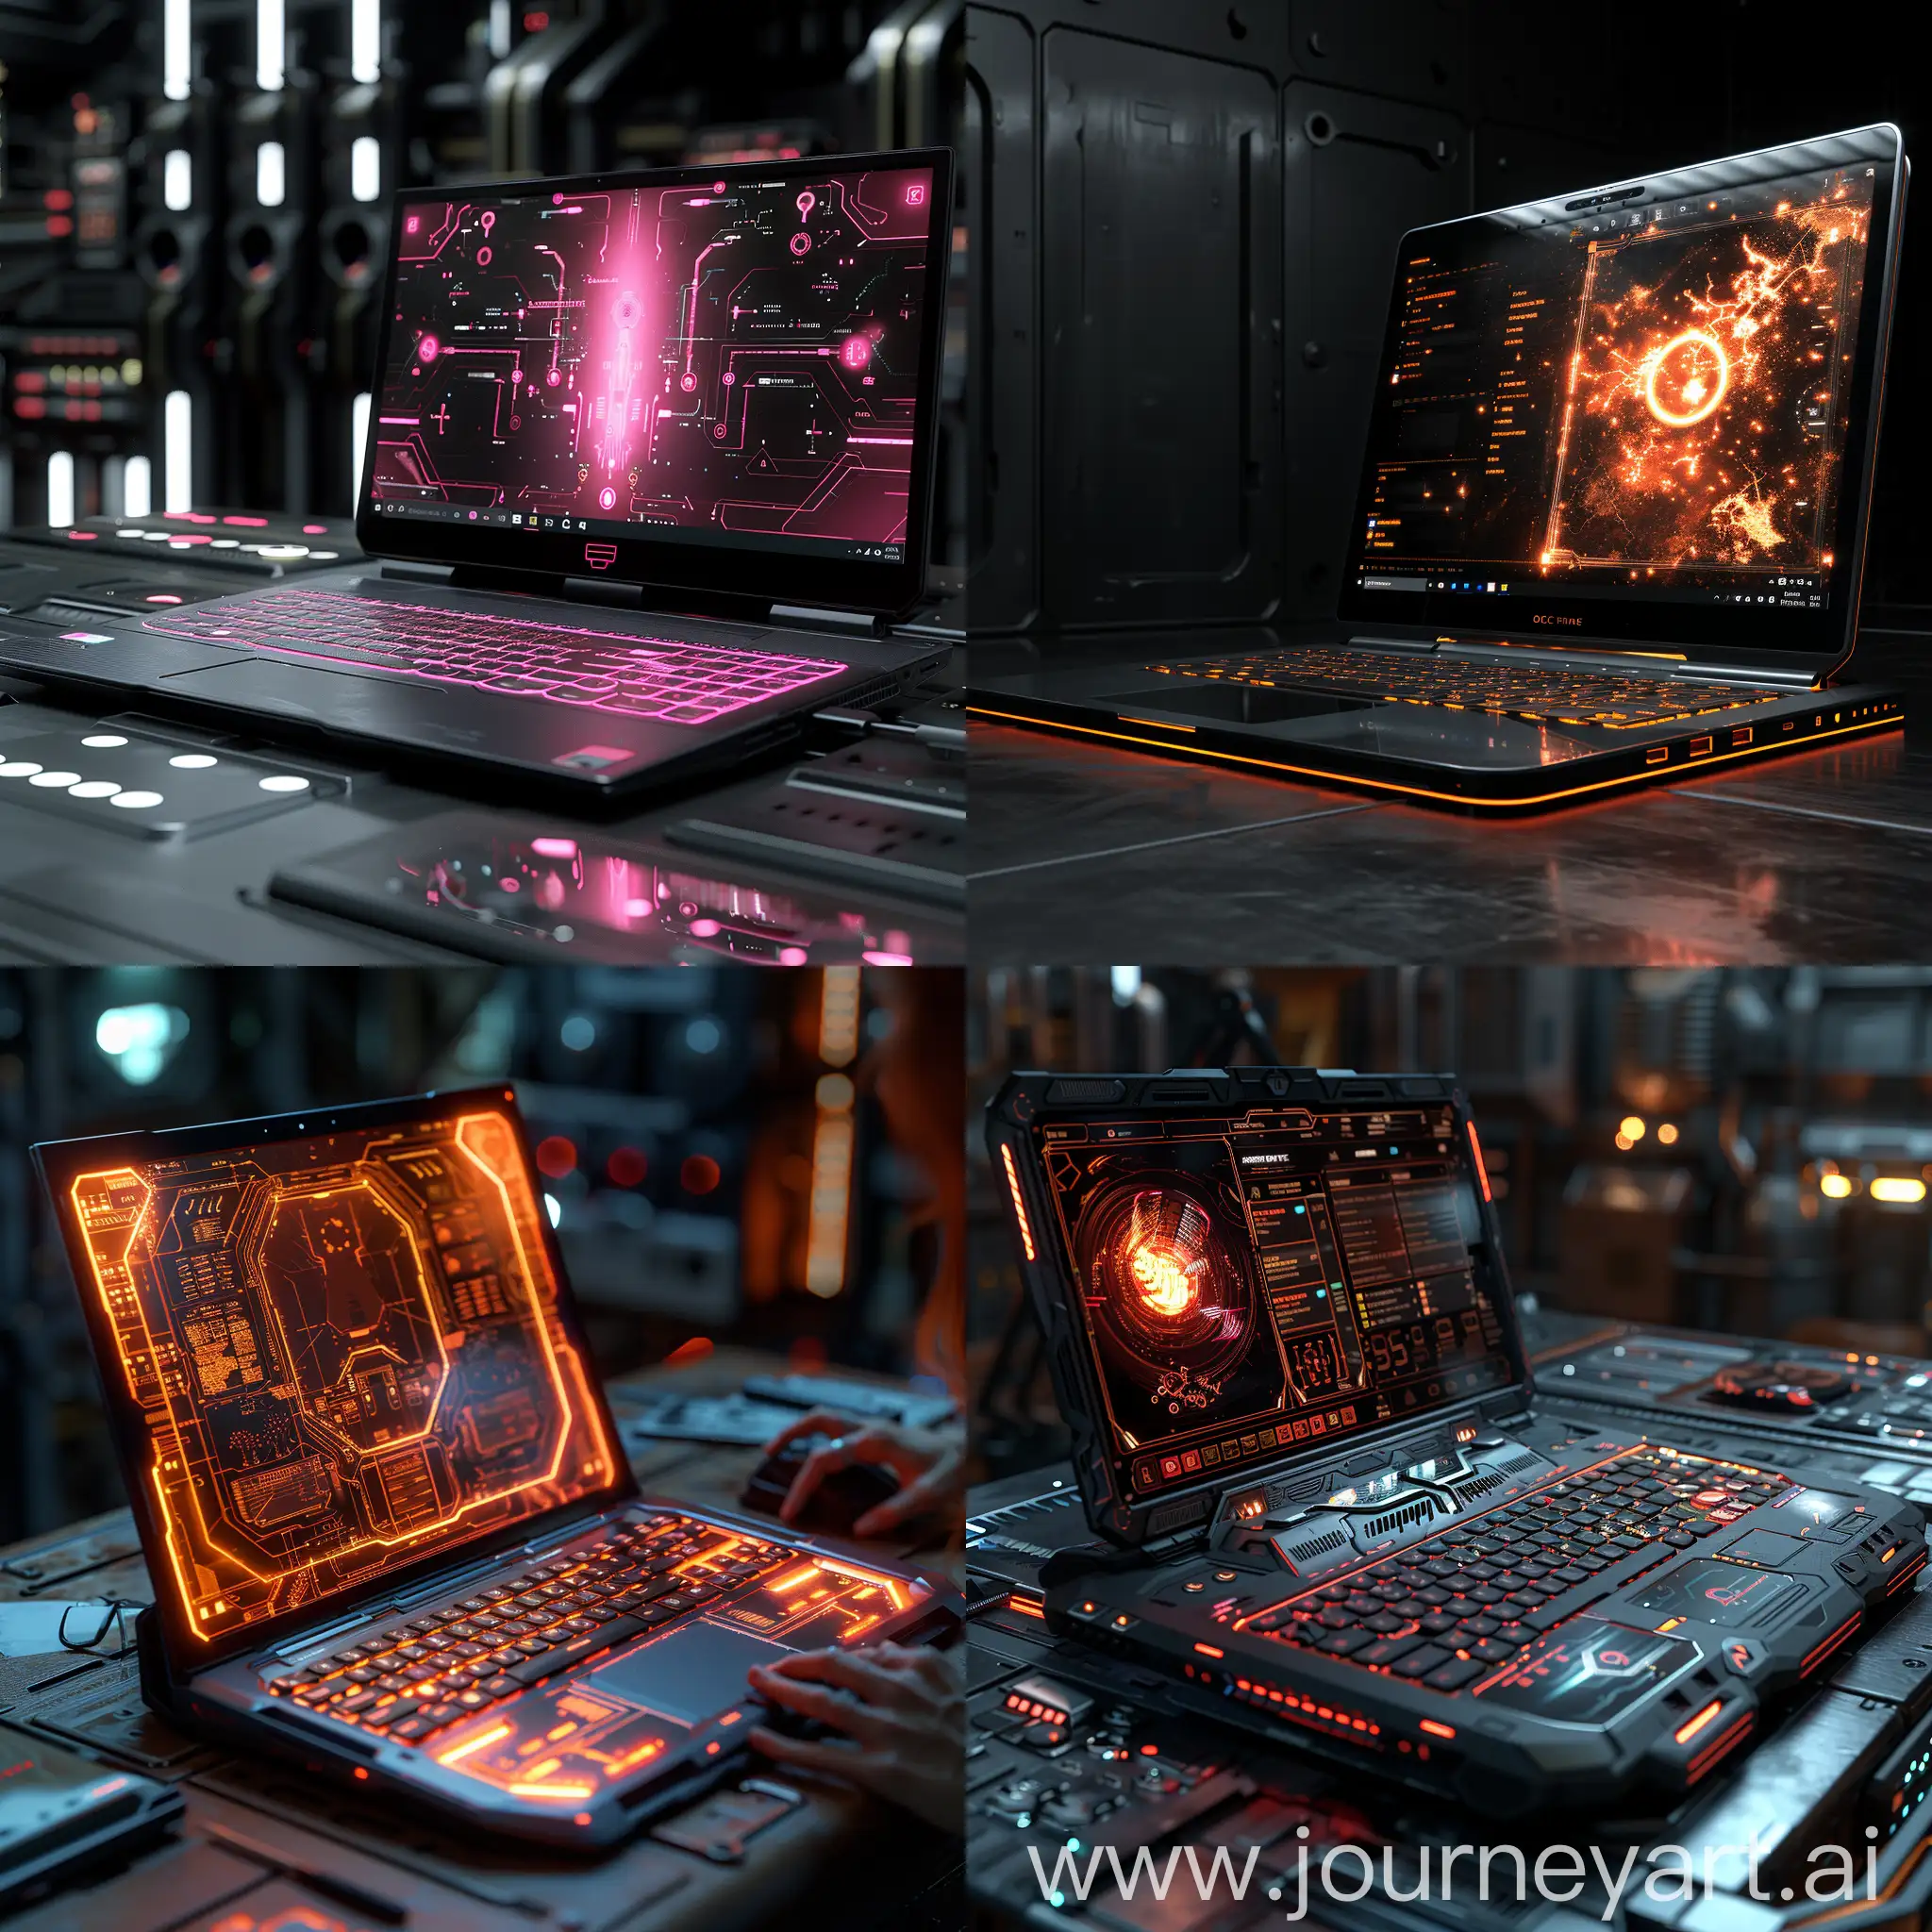 Futuristic laptop, Holographic Display, Biometric Security, AI Integration, Modular Design, Wireless Charging, Augmented Reality (AR) Support, Voice Control, Ultra-Thin and Lightweight, Self-Healing Materials, Quantum Computing, Bezel-Less Display, 360-Degree Hinge, RGB Lighting, Transparent Touchpad, Ergonomic Keyboard, Dynamic Cooling System, Hidden Ports, Immersive Sound System, Futuristic Materials, Personalization Options, octane render --stylize 1000